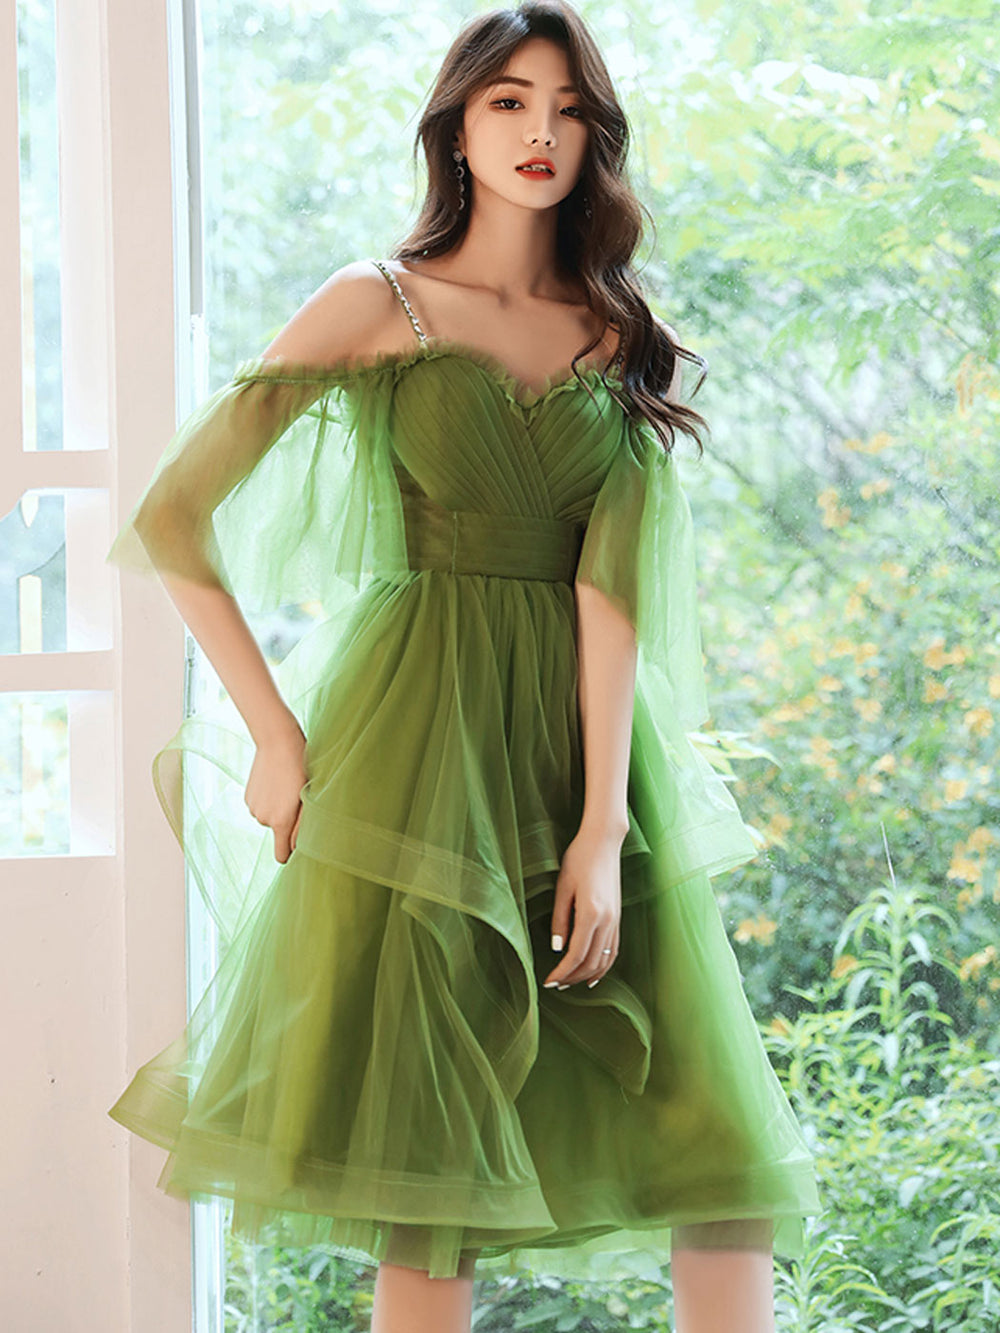 A-Line Green Sweetheart Neck Tulle Short Prom Dress, Green Homecoming Dress